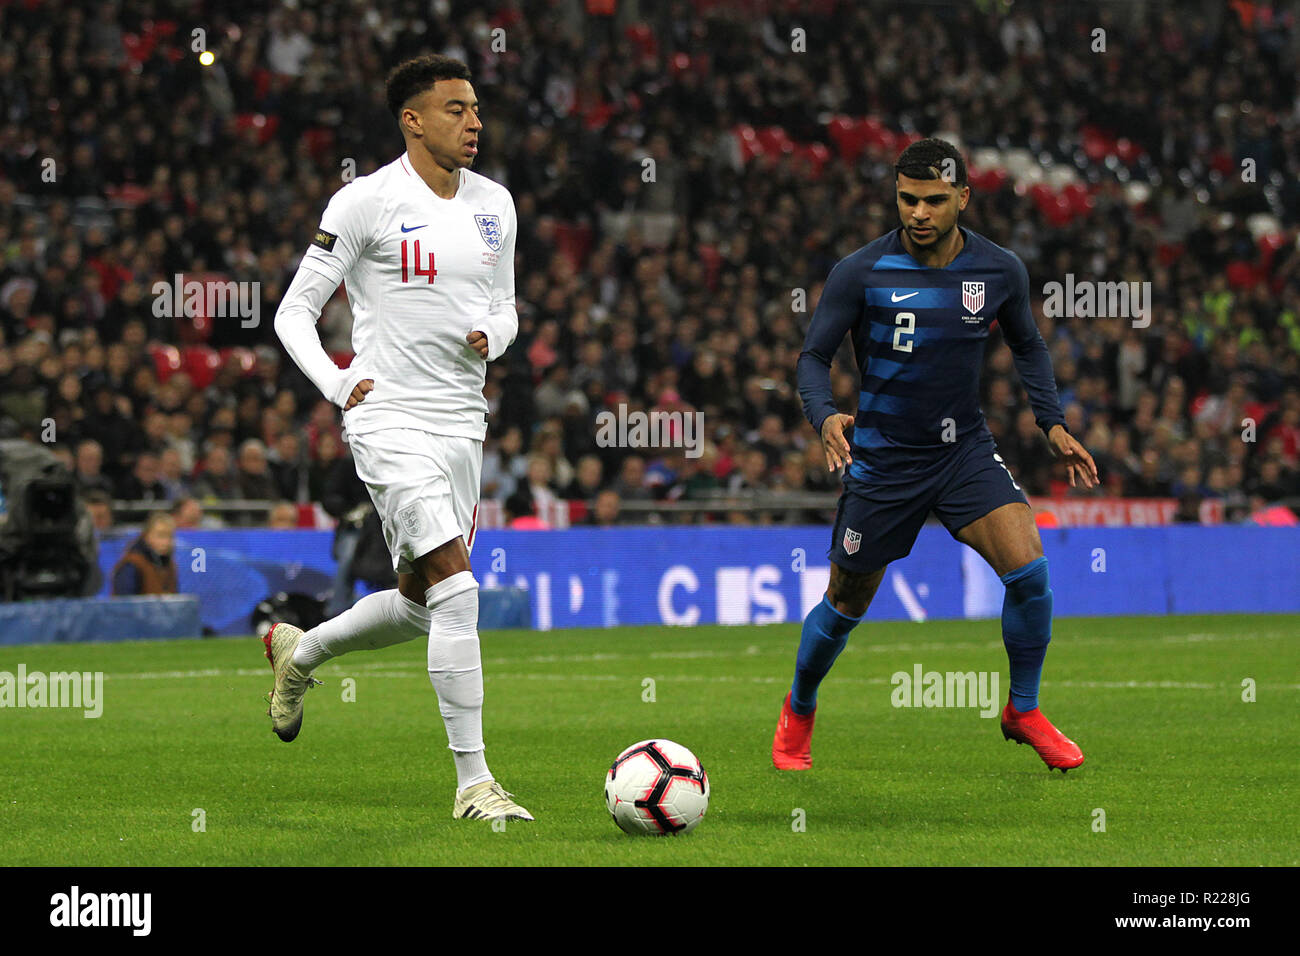 London, UK. 15th November, 2018. Jesse Lingard of England under pressure from DeAndre Yedlin of USA during the International Friendly match between England and USA at Wembley Stadium on November 15th 2018 in London, England. (Photo by Matt Bradshaw/phcimages) Credit: PHC Images/Alamy Live News Stock Photo